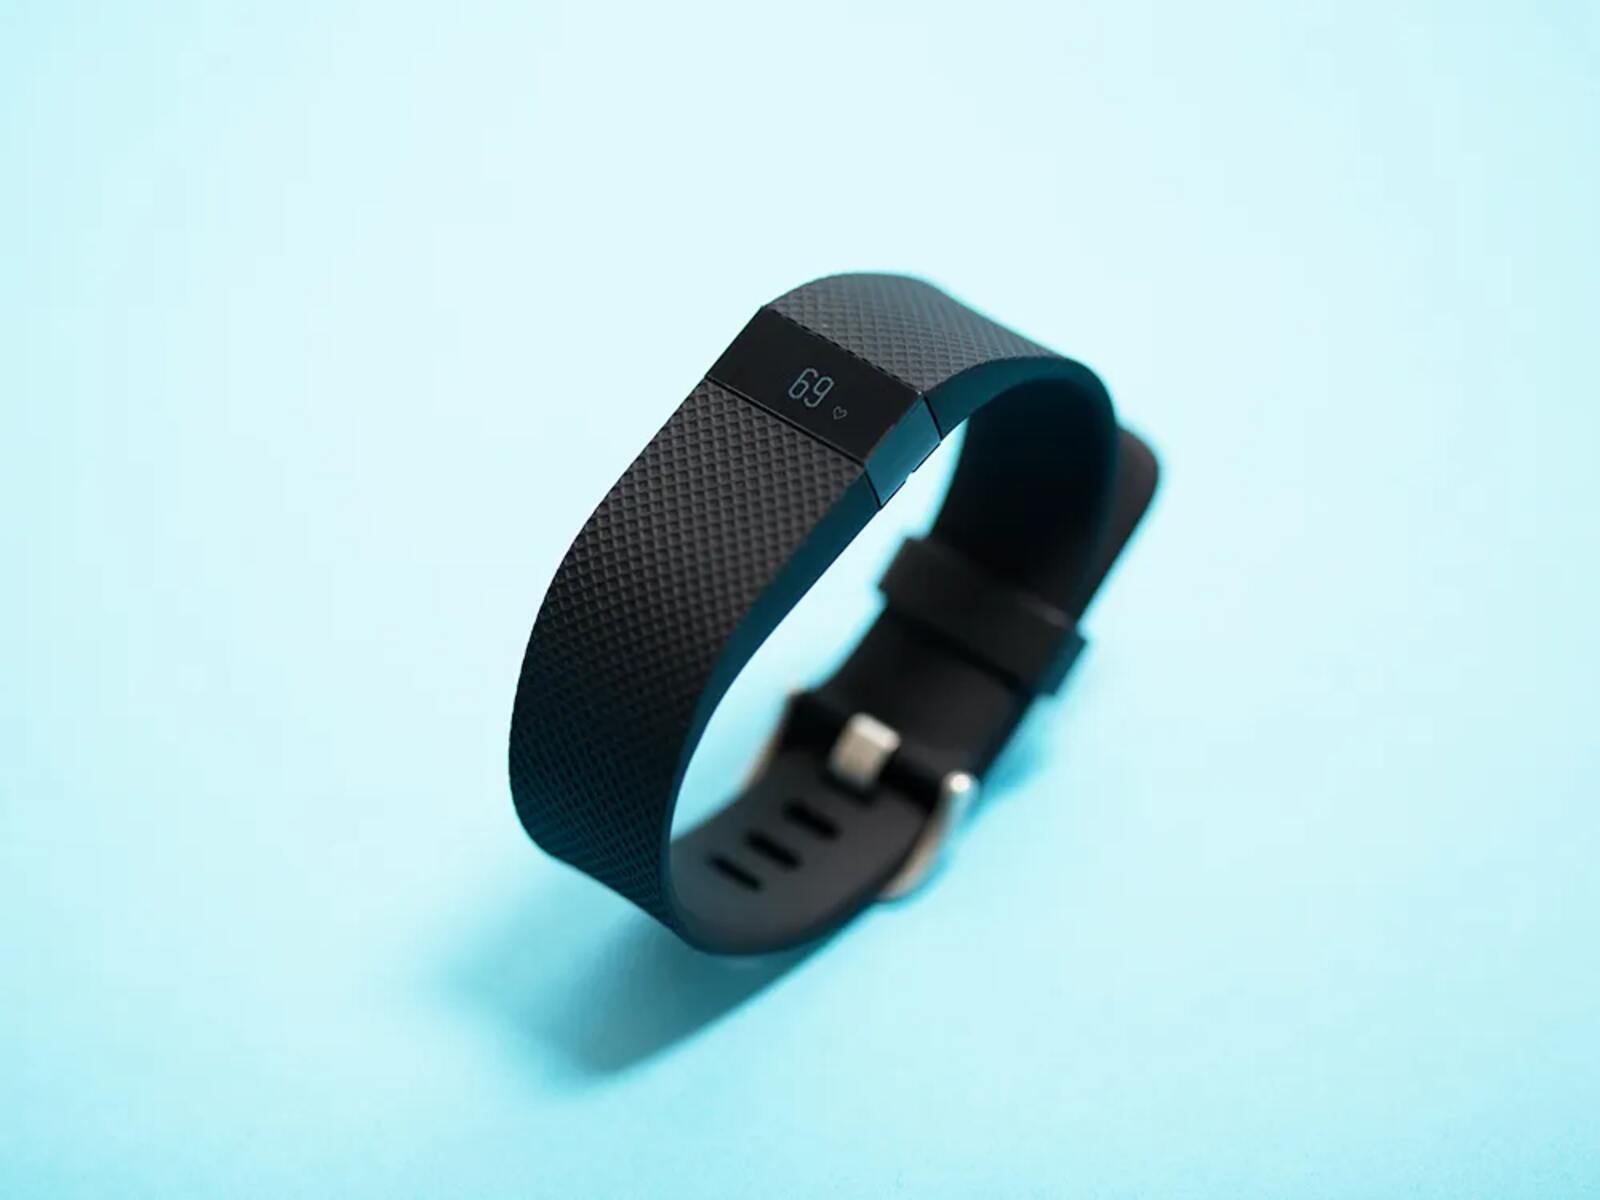 charge-hr-band-replacement-a-guide-to-replacing-the-band-on-fitbit-charge-hr